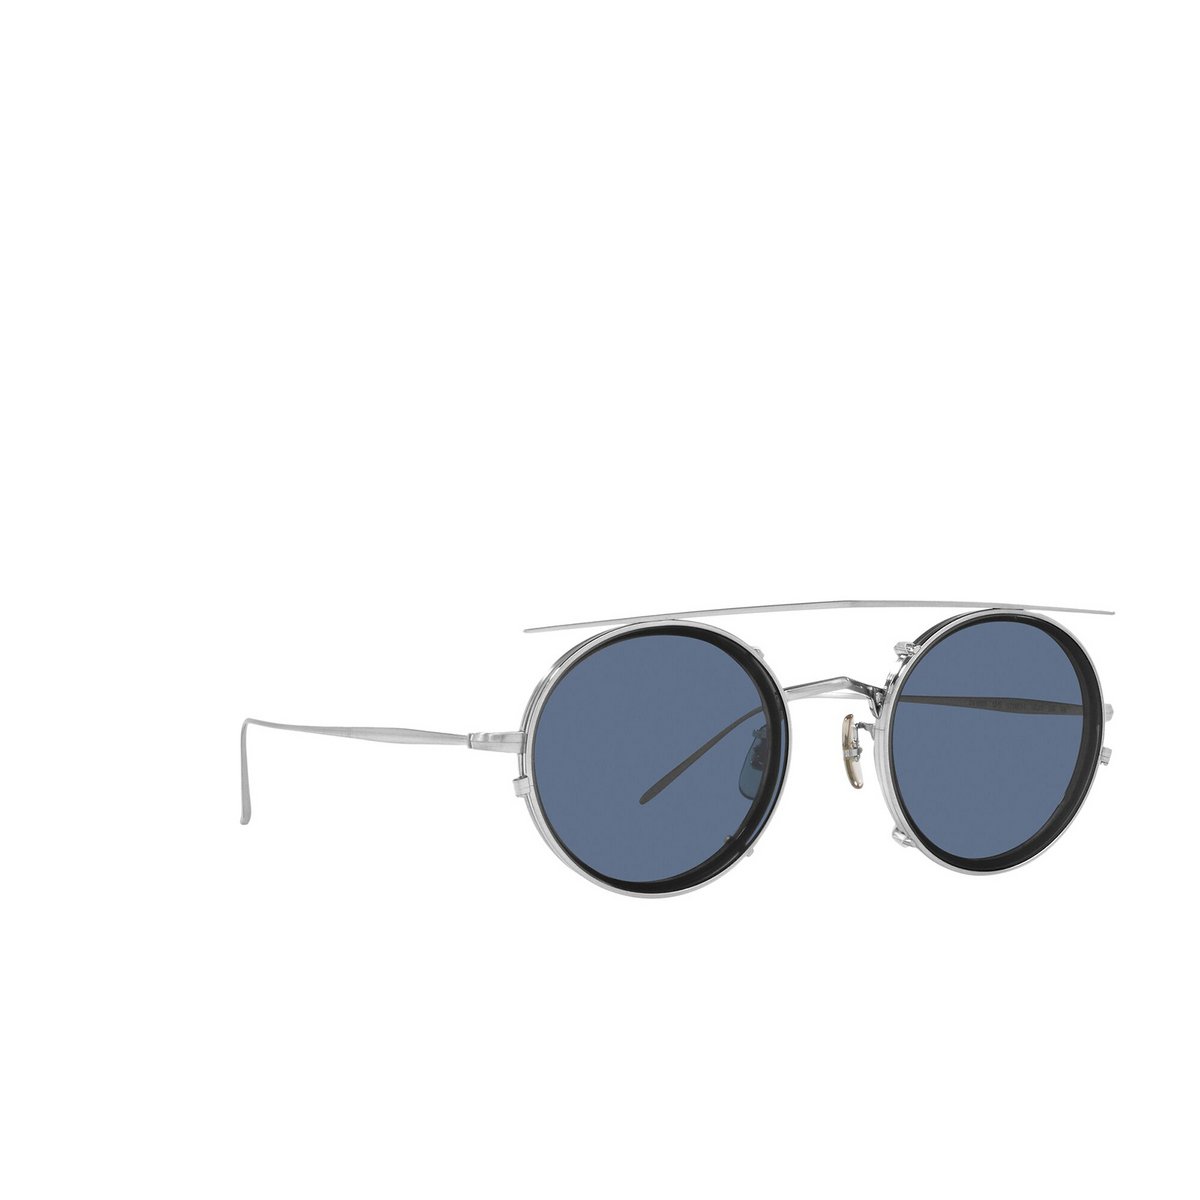 Oliver Peoples G. PONTI-2 Sunglasses 5315 Brushed Chrome - three-quarters view